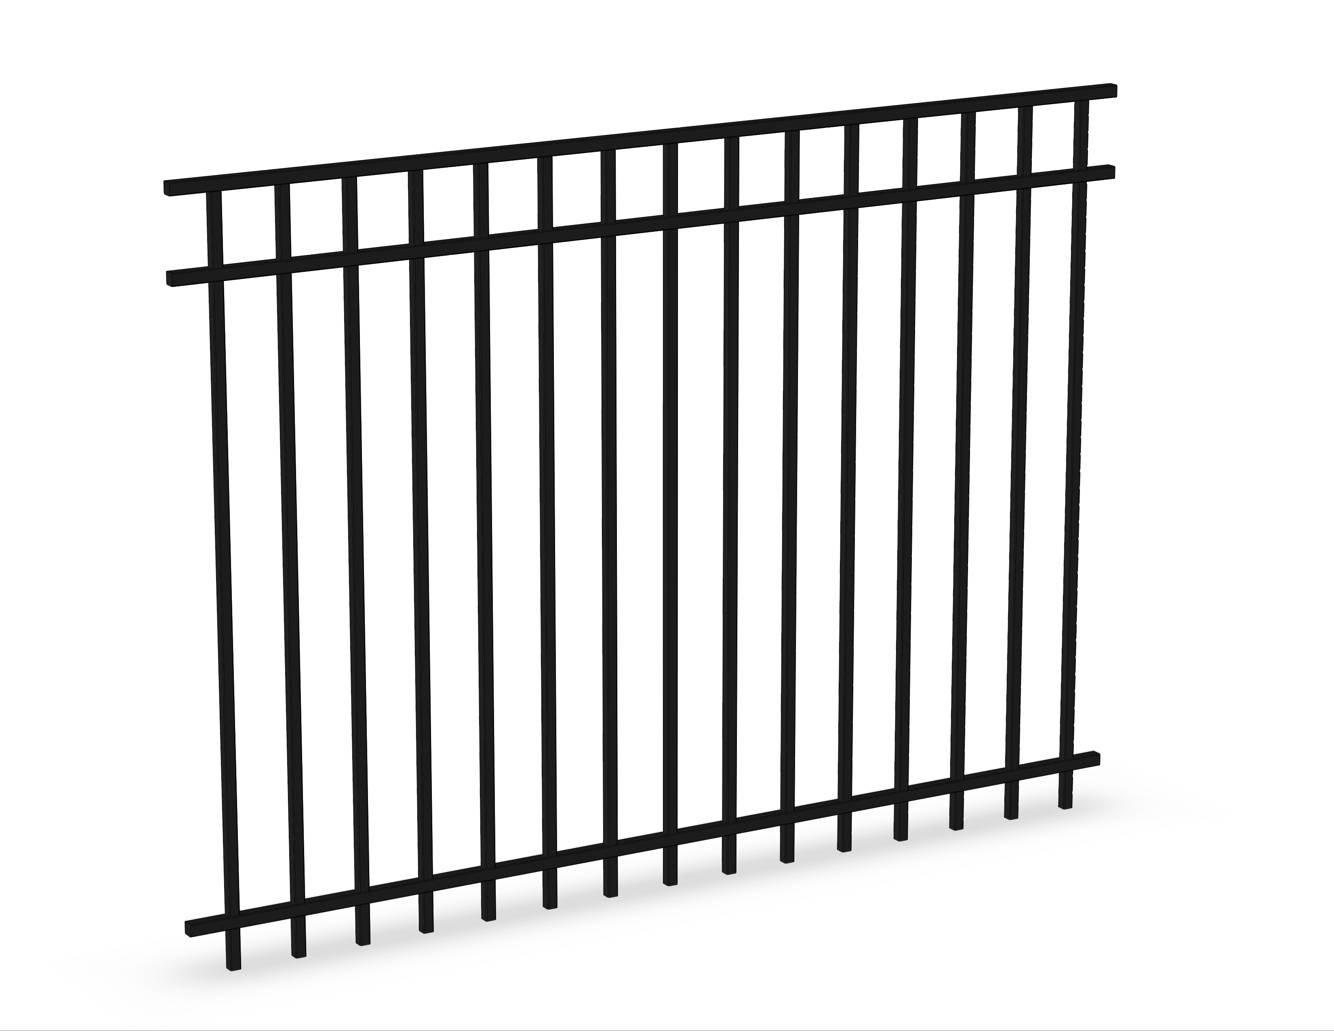 Majestic’s flush top Style steel fence